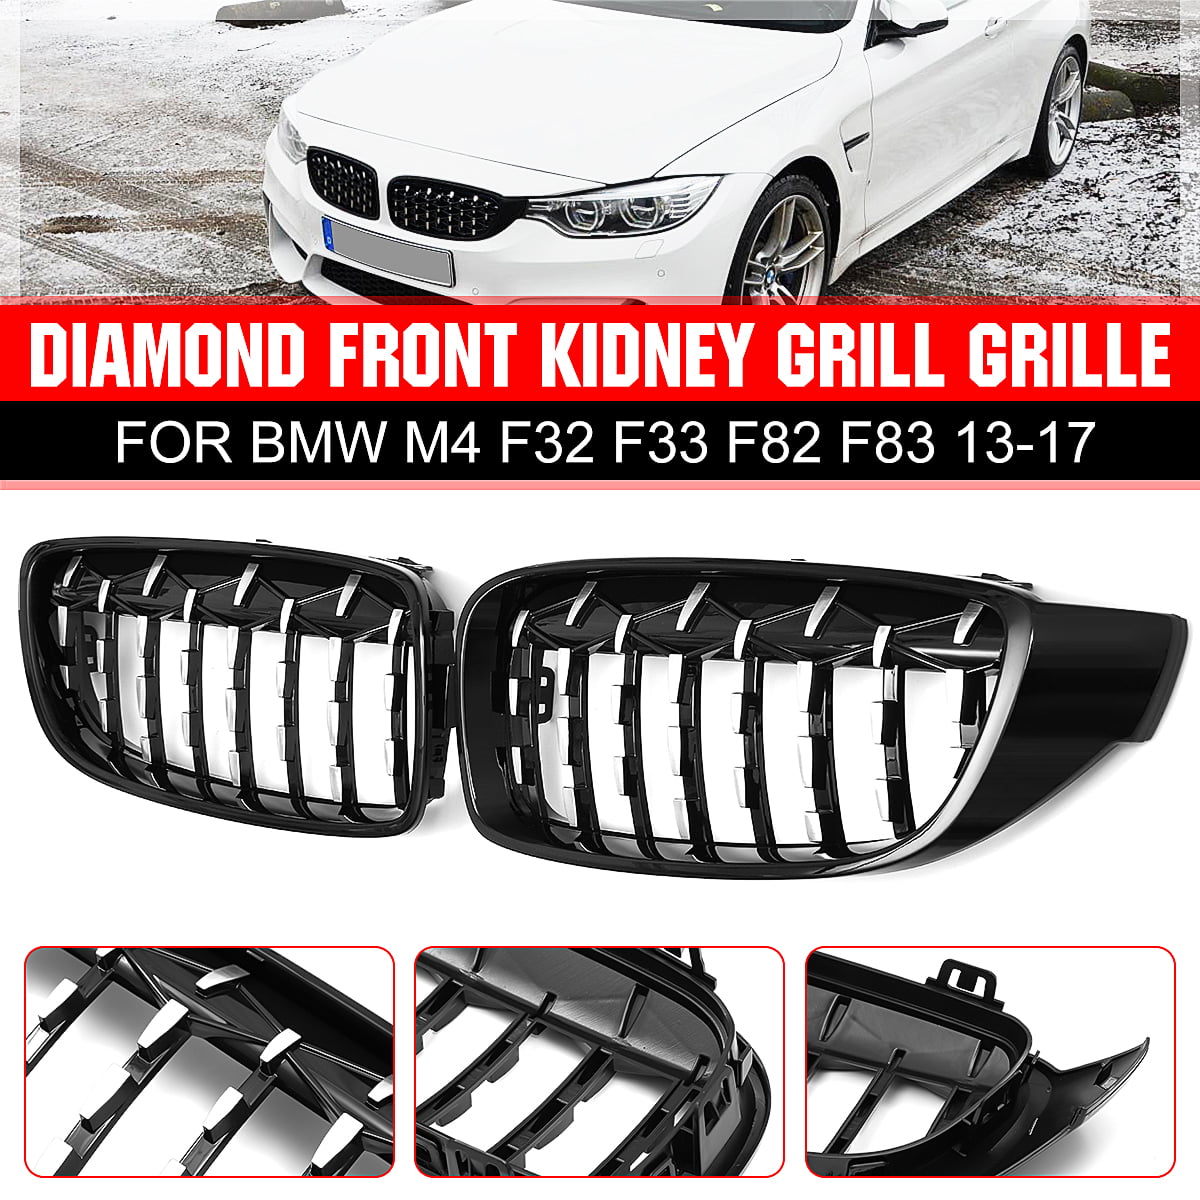 Front Kidney Grill Grilles Diamond Black&Chrome For BMW M4 F32 F33 F82 F83 13-17 